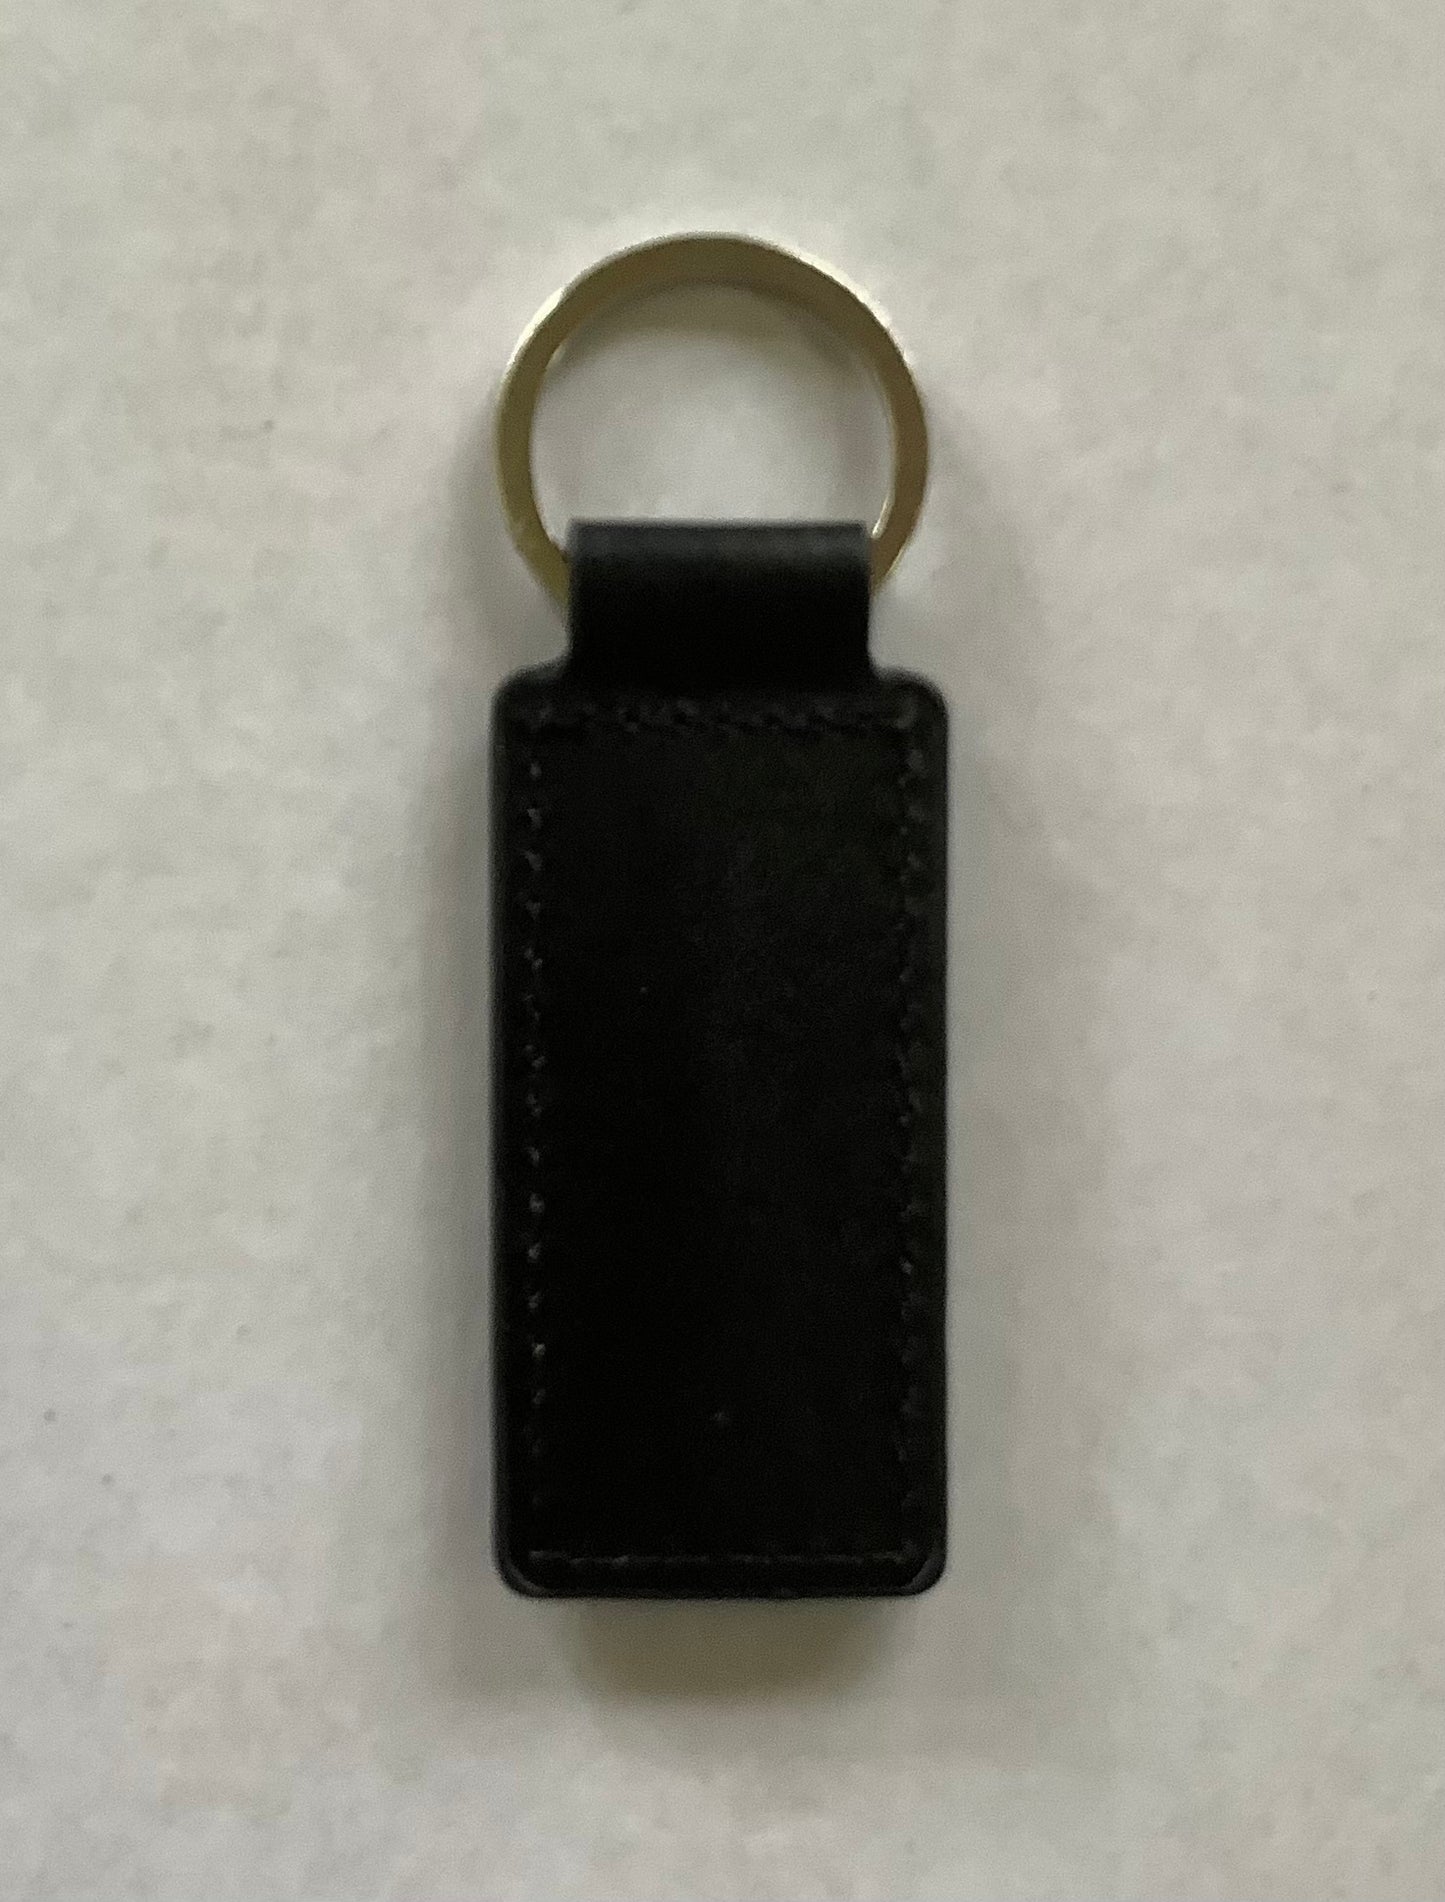 EJ-EH Holden Leather Key Ring